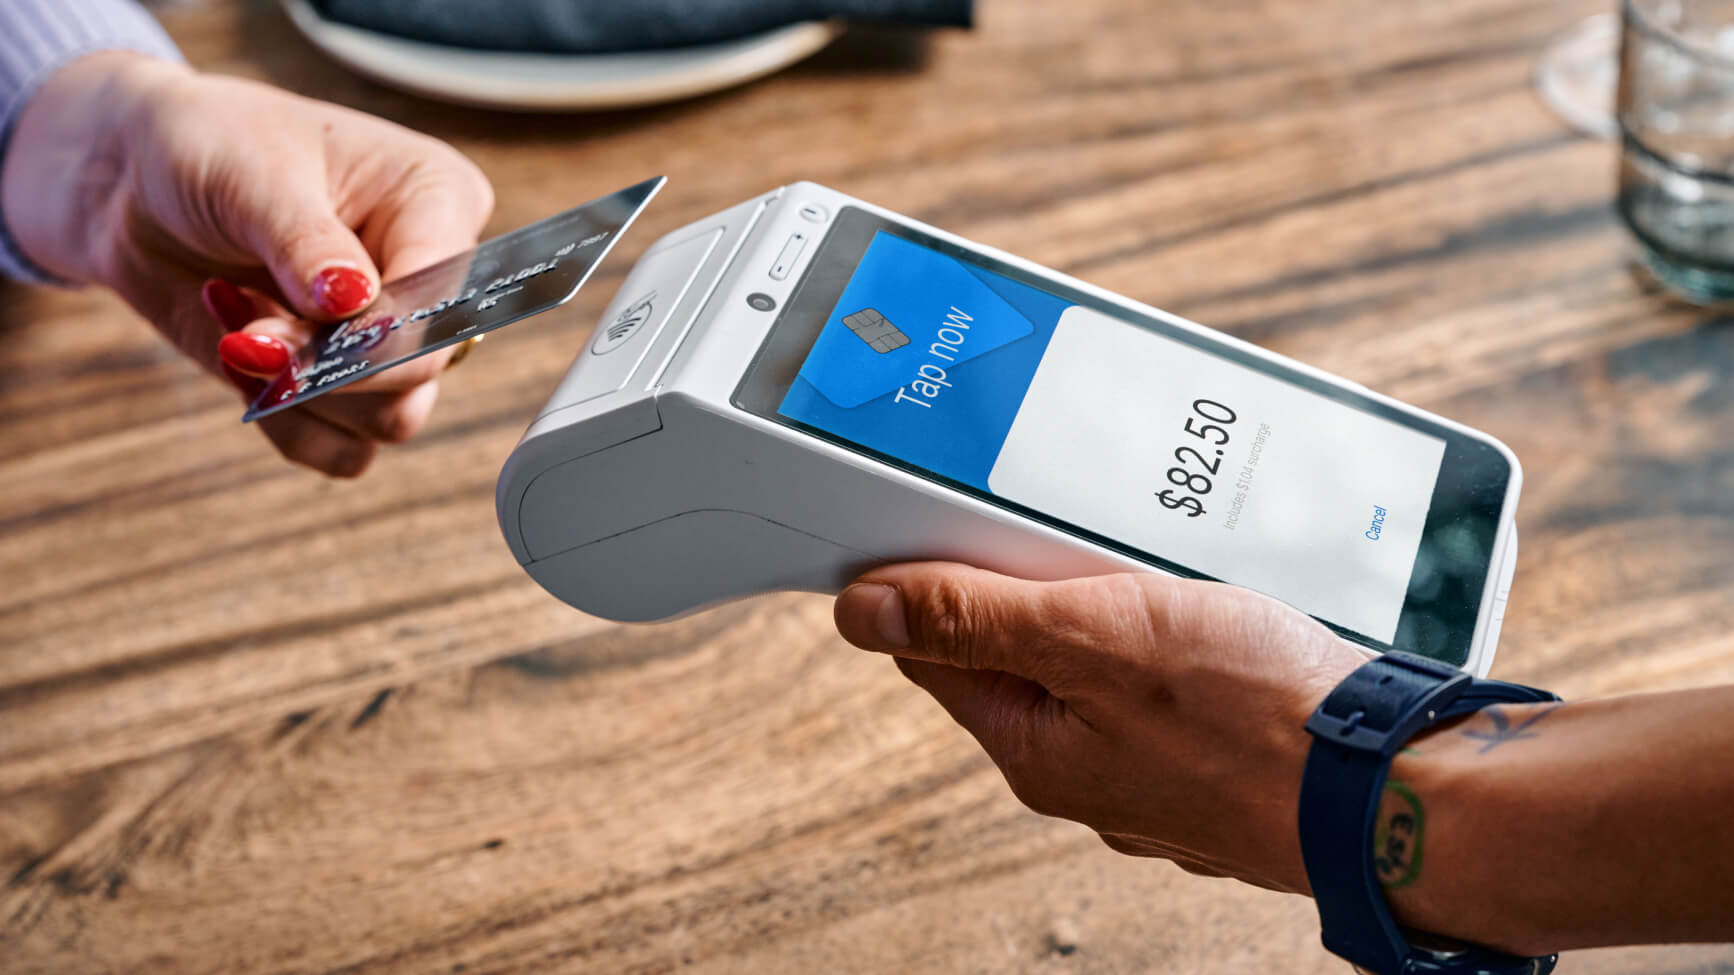 card payment device by Zeller